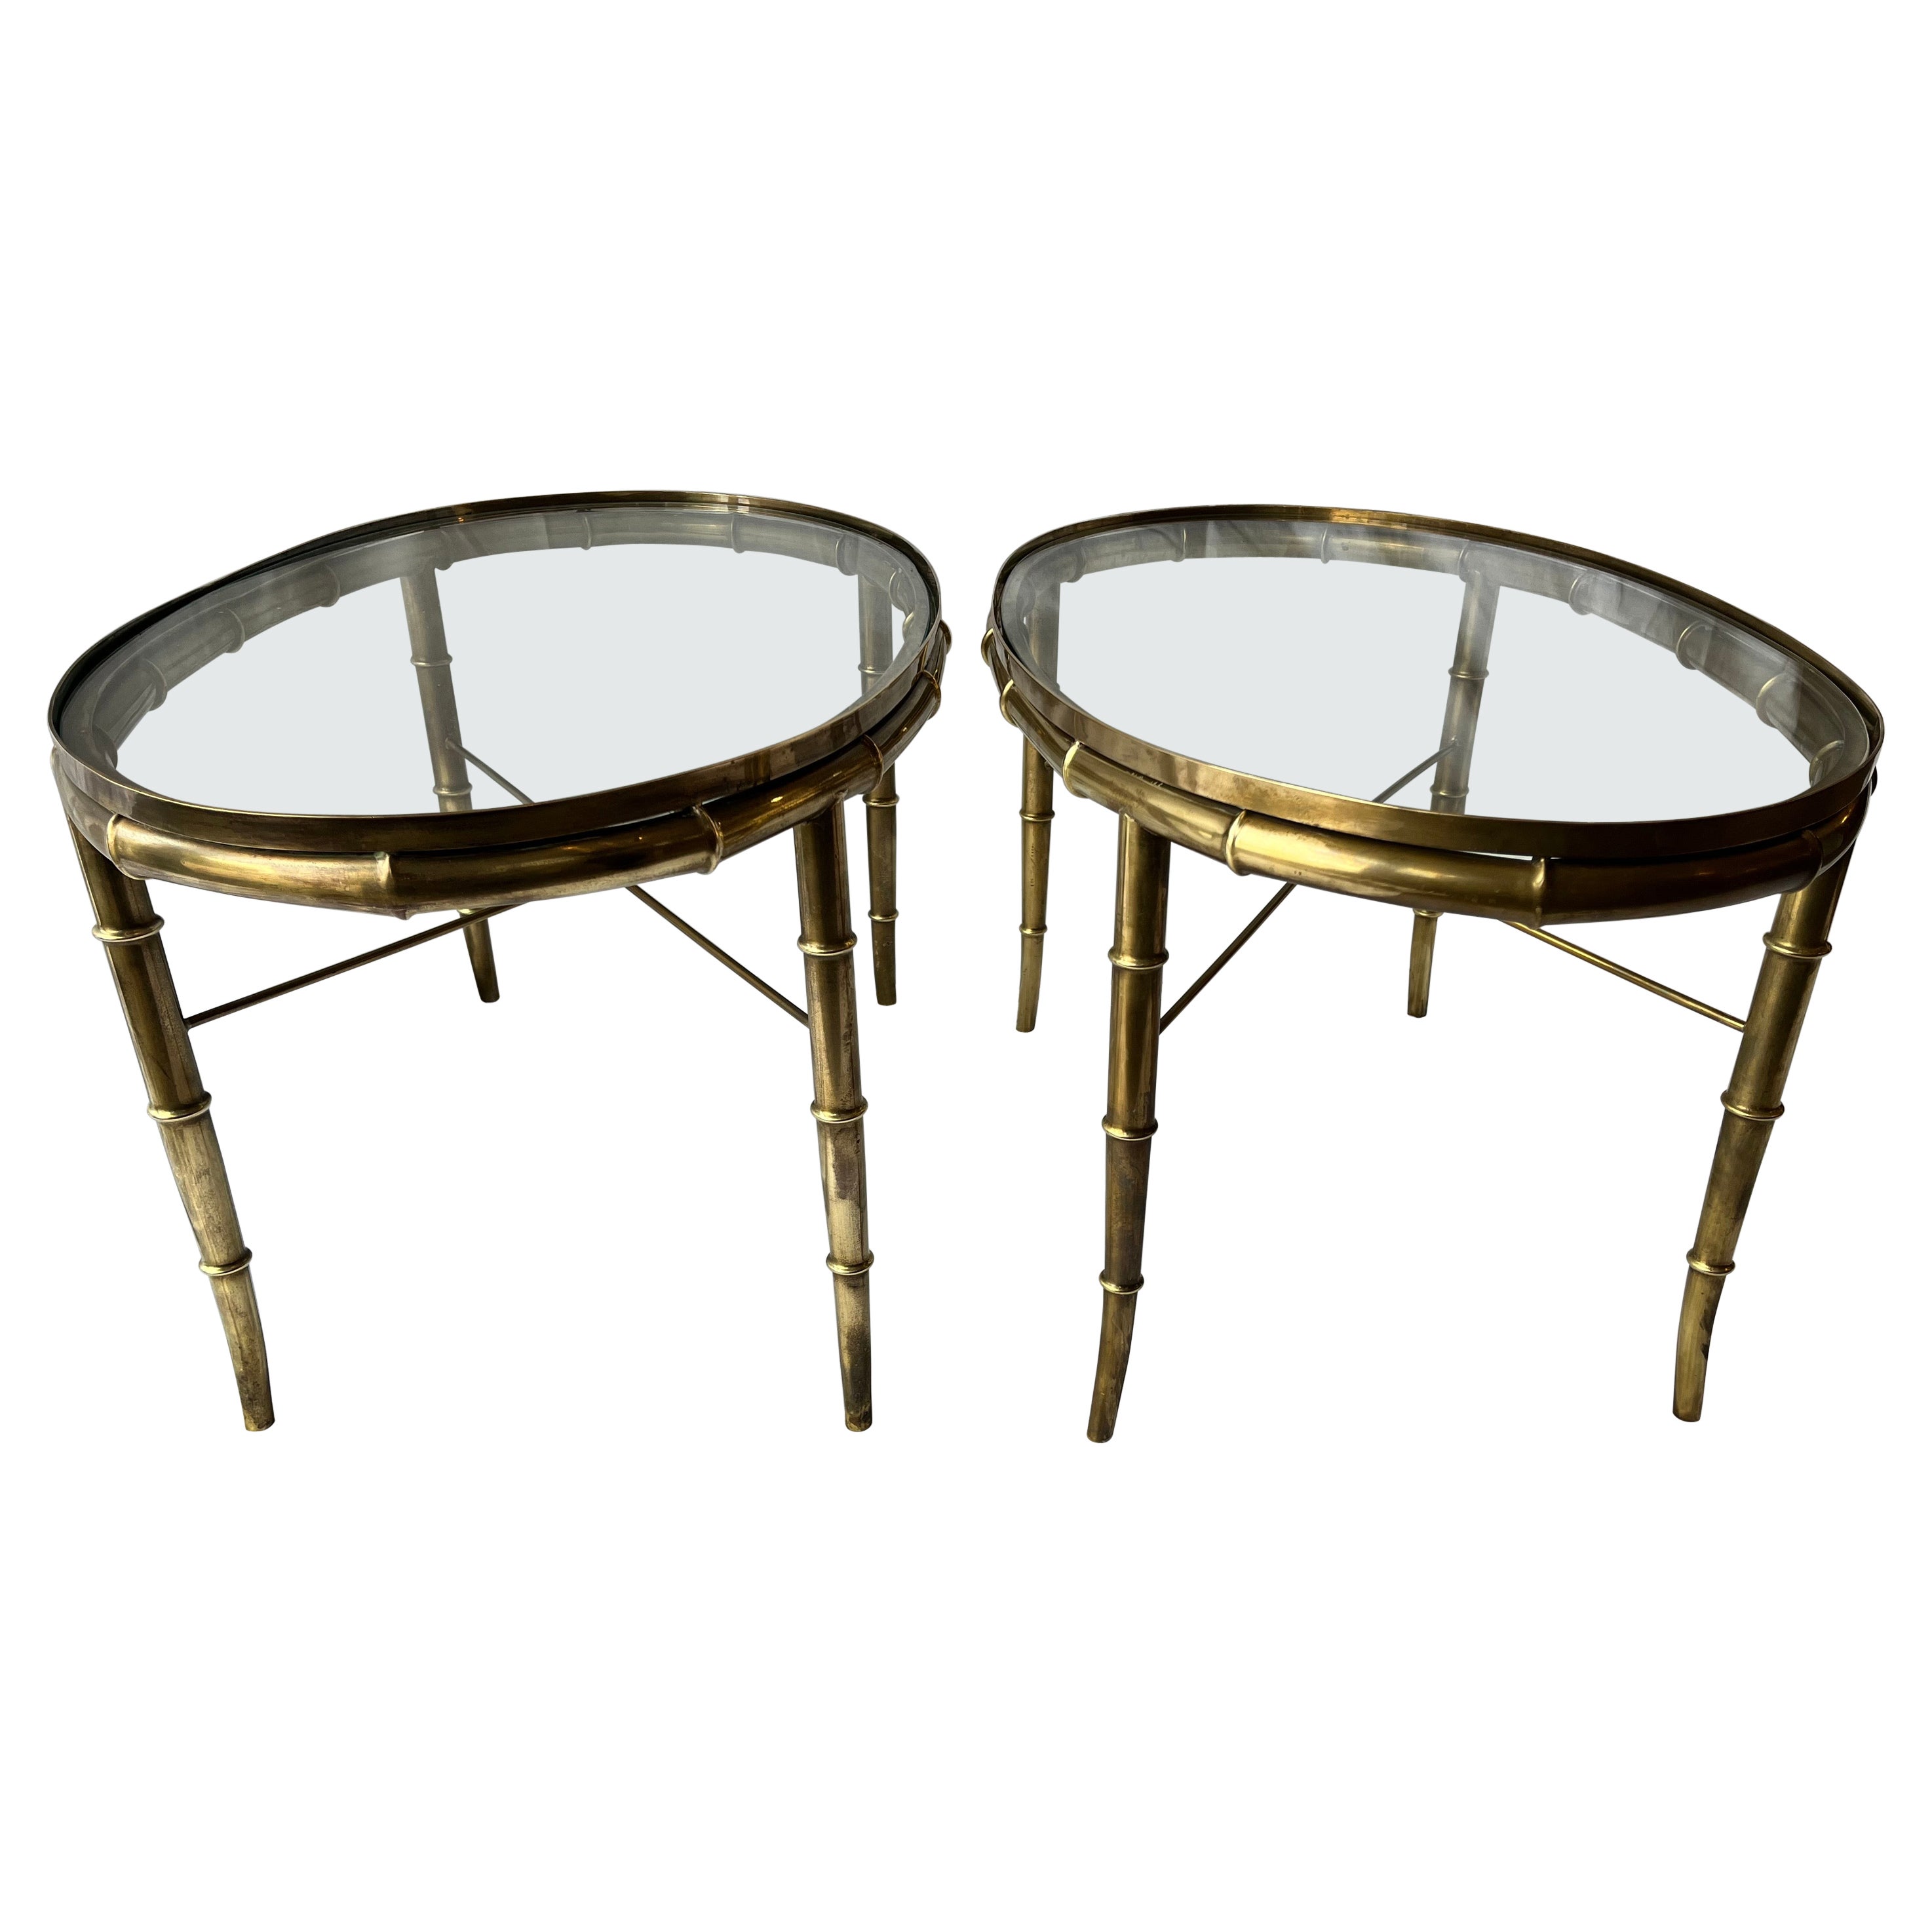 Pair Vintage Italian Brass Faux Bamboo Side or End Tables Style of Mastercraft